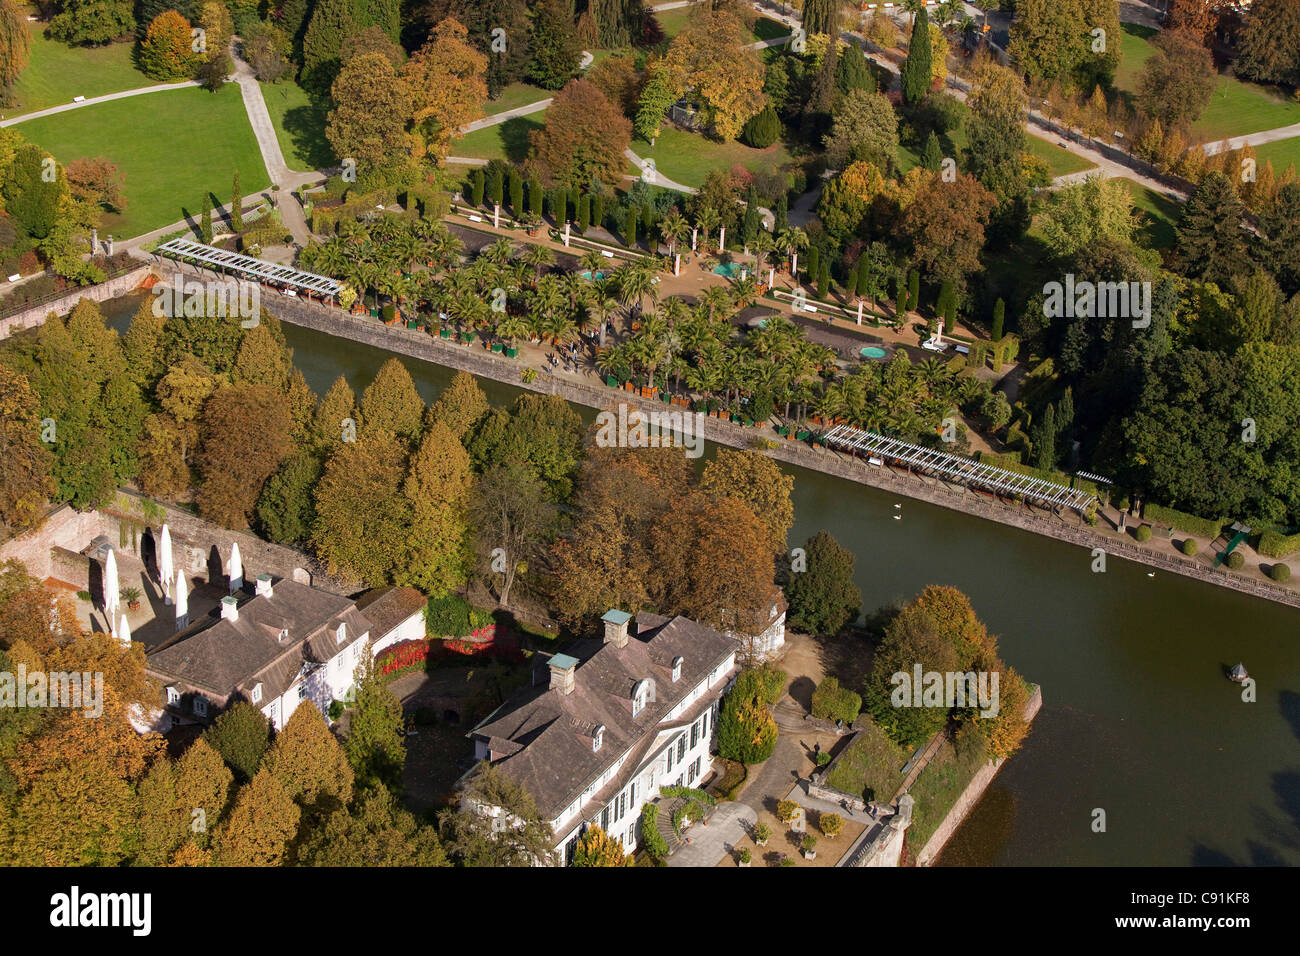 Aerial view of Bad Pyrmont castle and gardens, moat and palm garden, Lower Saxony, Germany Stock Photo